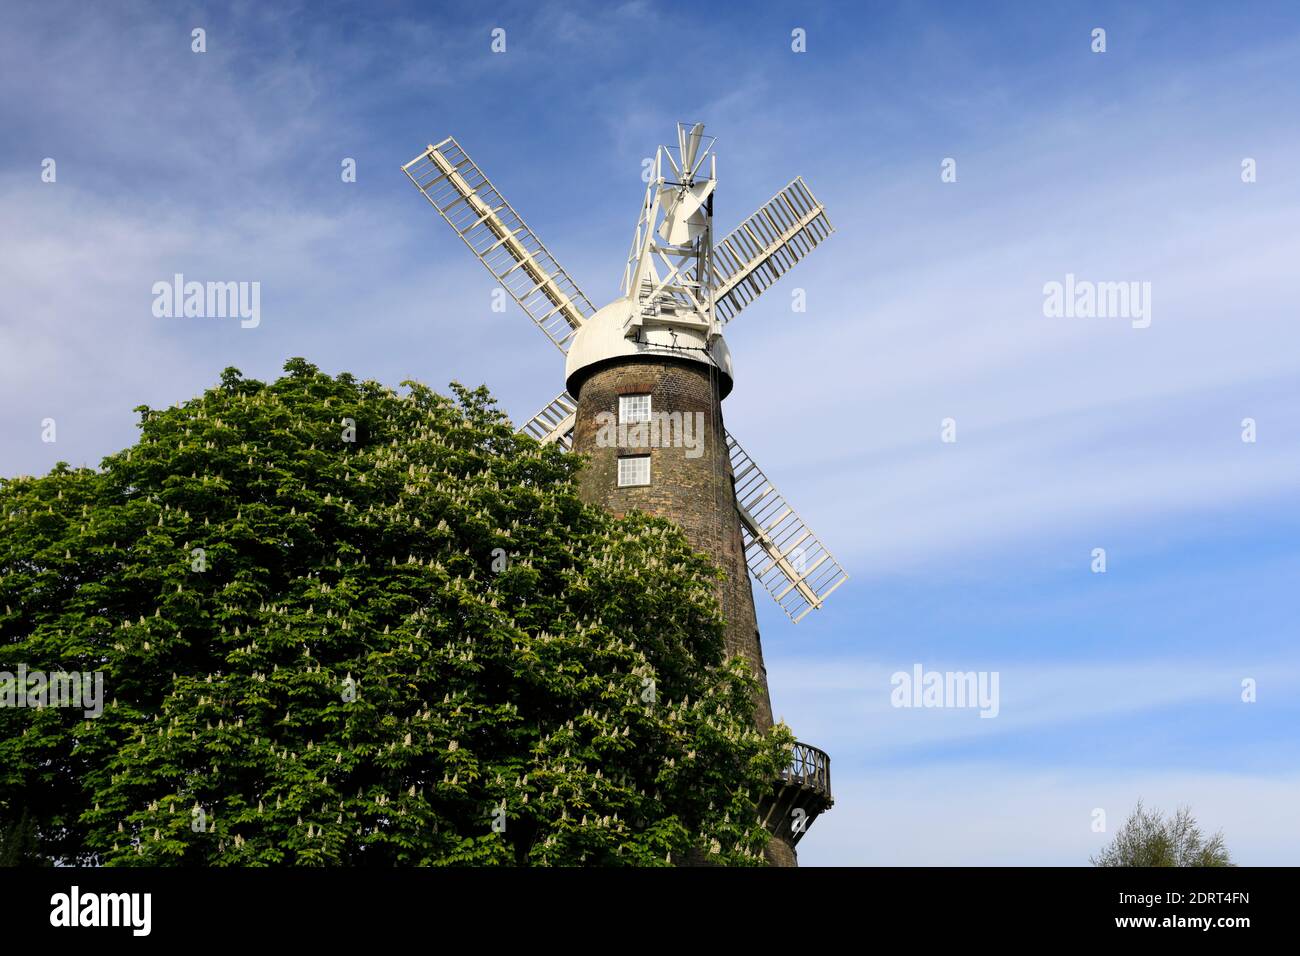 Moulton tower windmill, Moulton village, Lincolnshire, England The tallest tower mill in Britain. Stock Photo